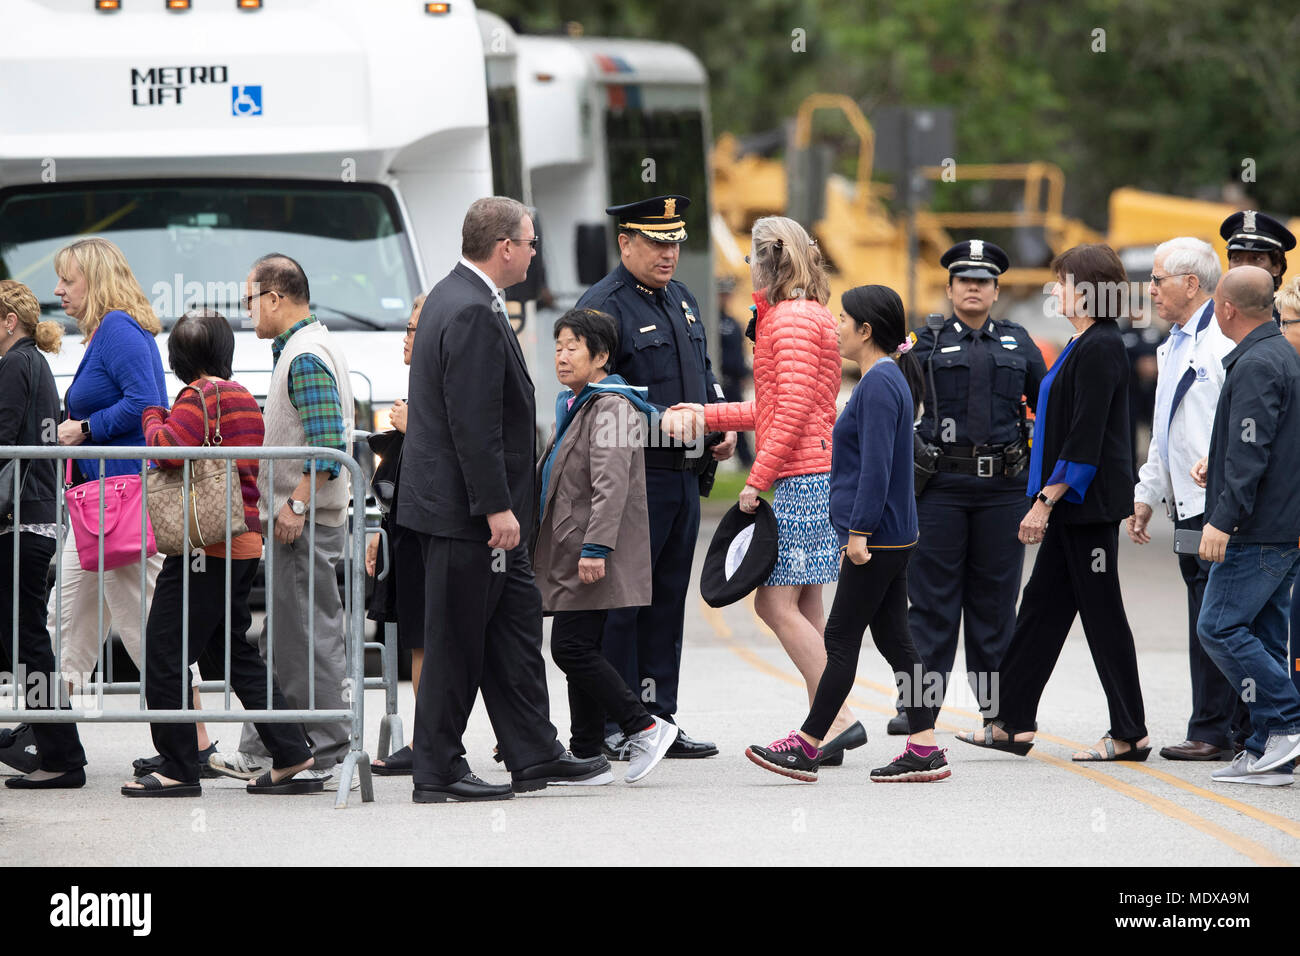 Police help with crowd control as mourners arrive to pay respects to the late former First Lady Barbara Bush at S. Martin's Episcopal Church in Houston Stock Photo